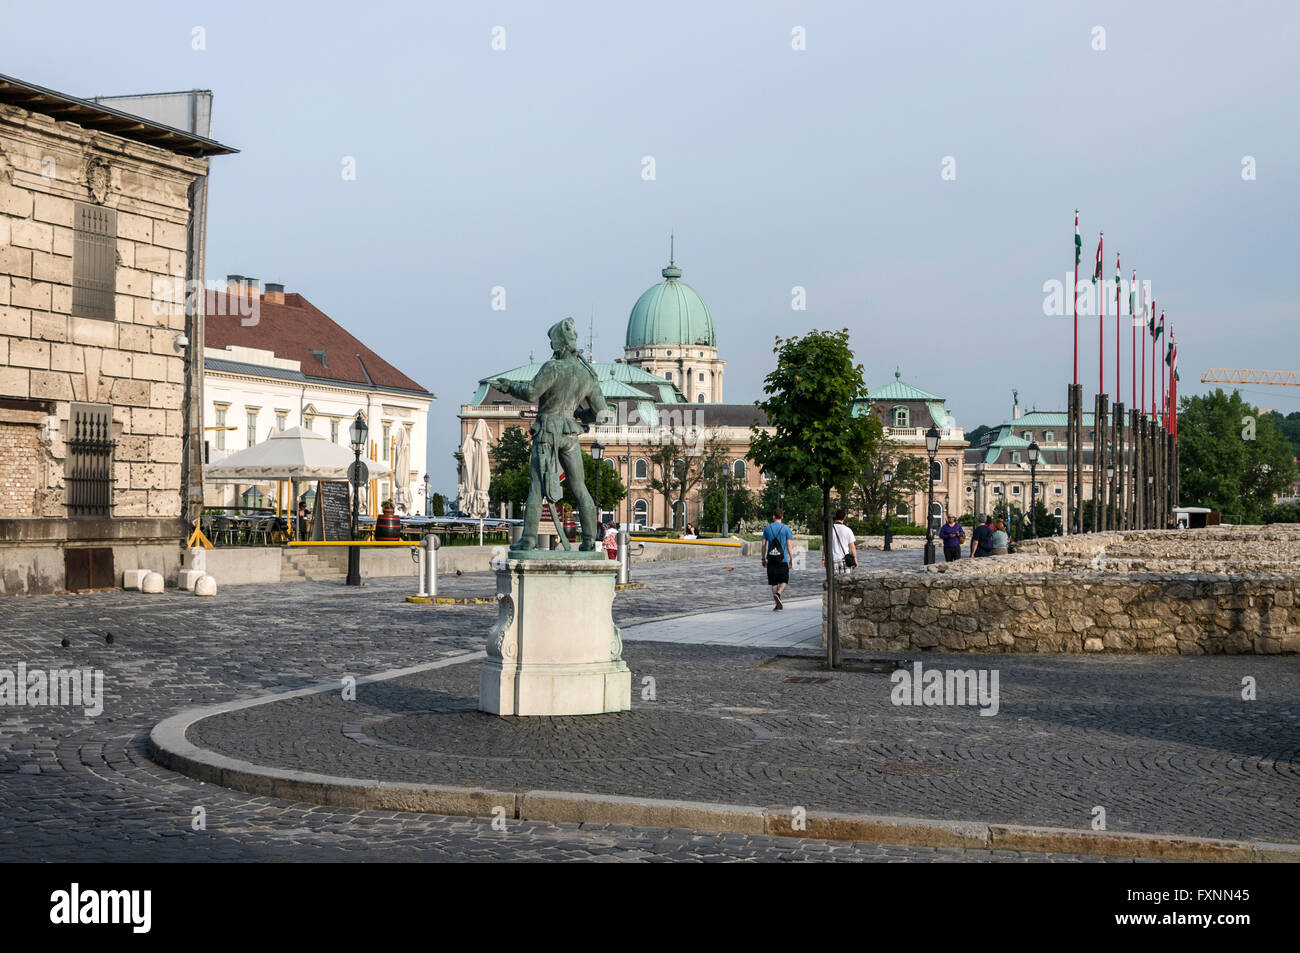 Part of Buda Castle Hill in Budapest, Hungary which is a designated UNESCO World Heritage site. Stock Photo